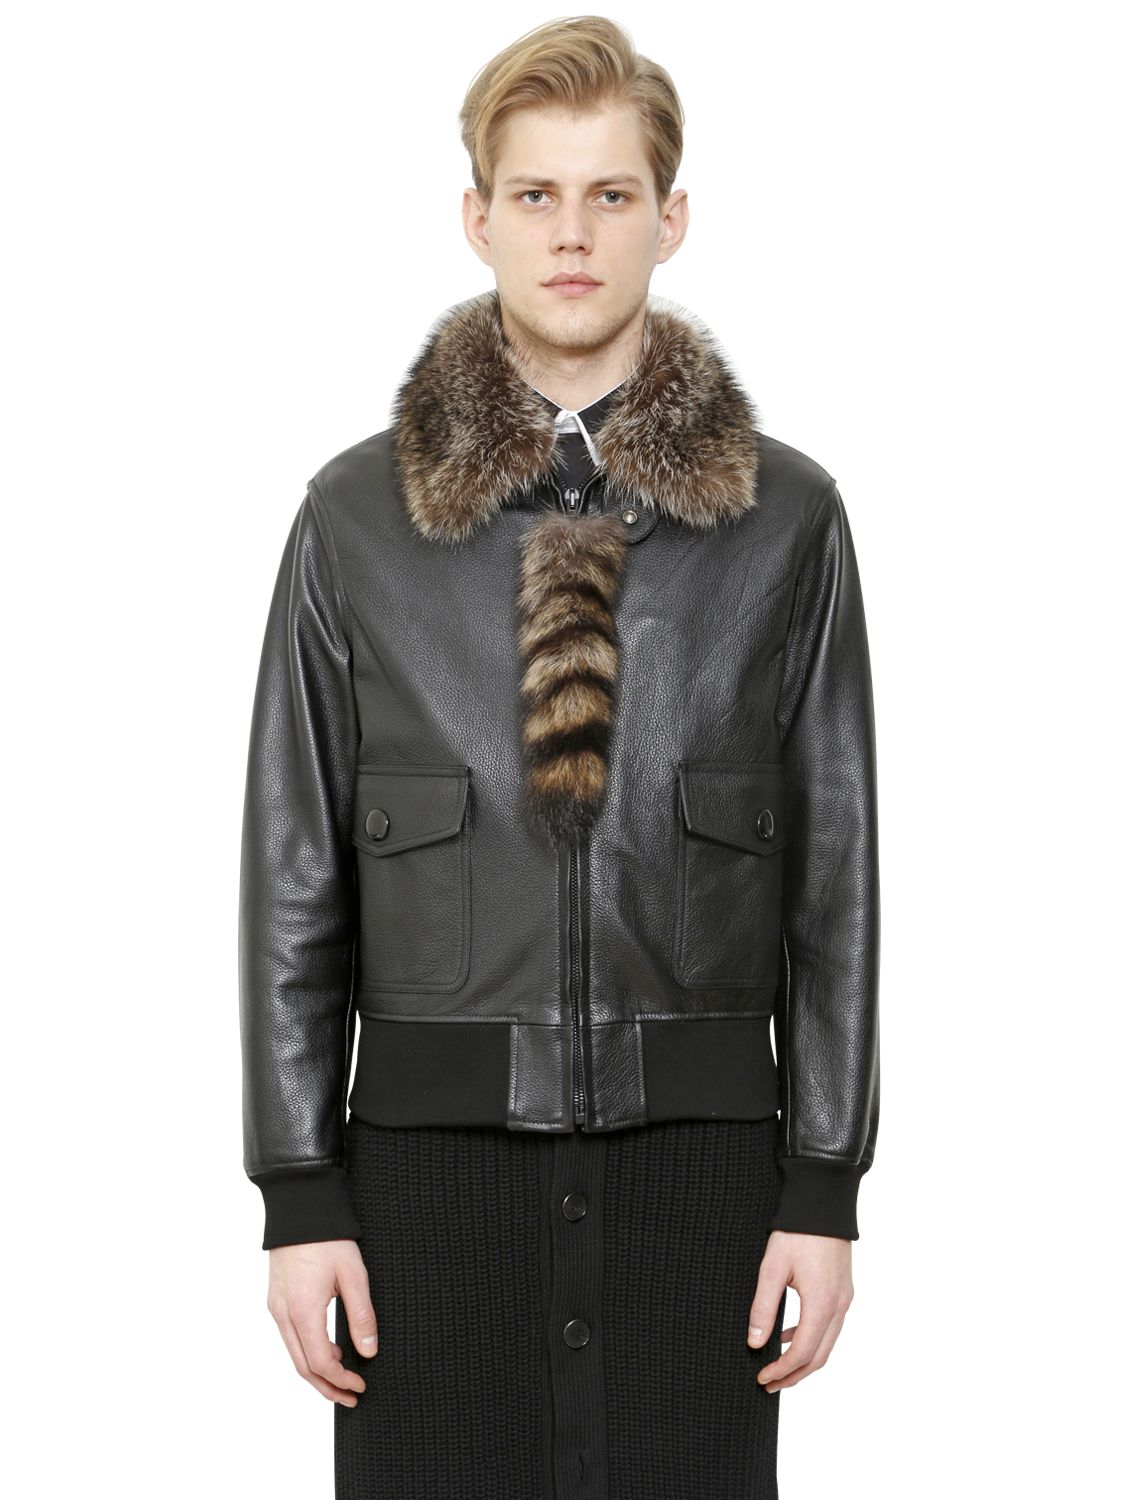 Lyst - Givenchy Raccoon Fur & Leather Aviator Jacket in Black for Men